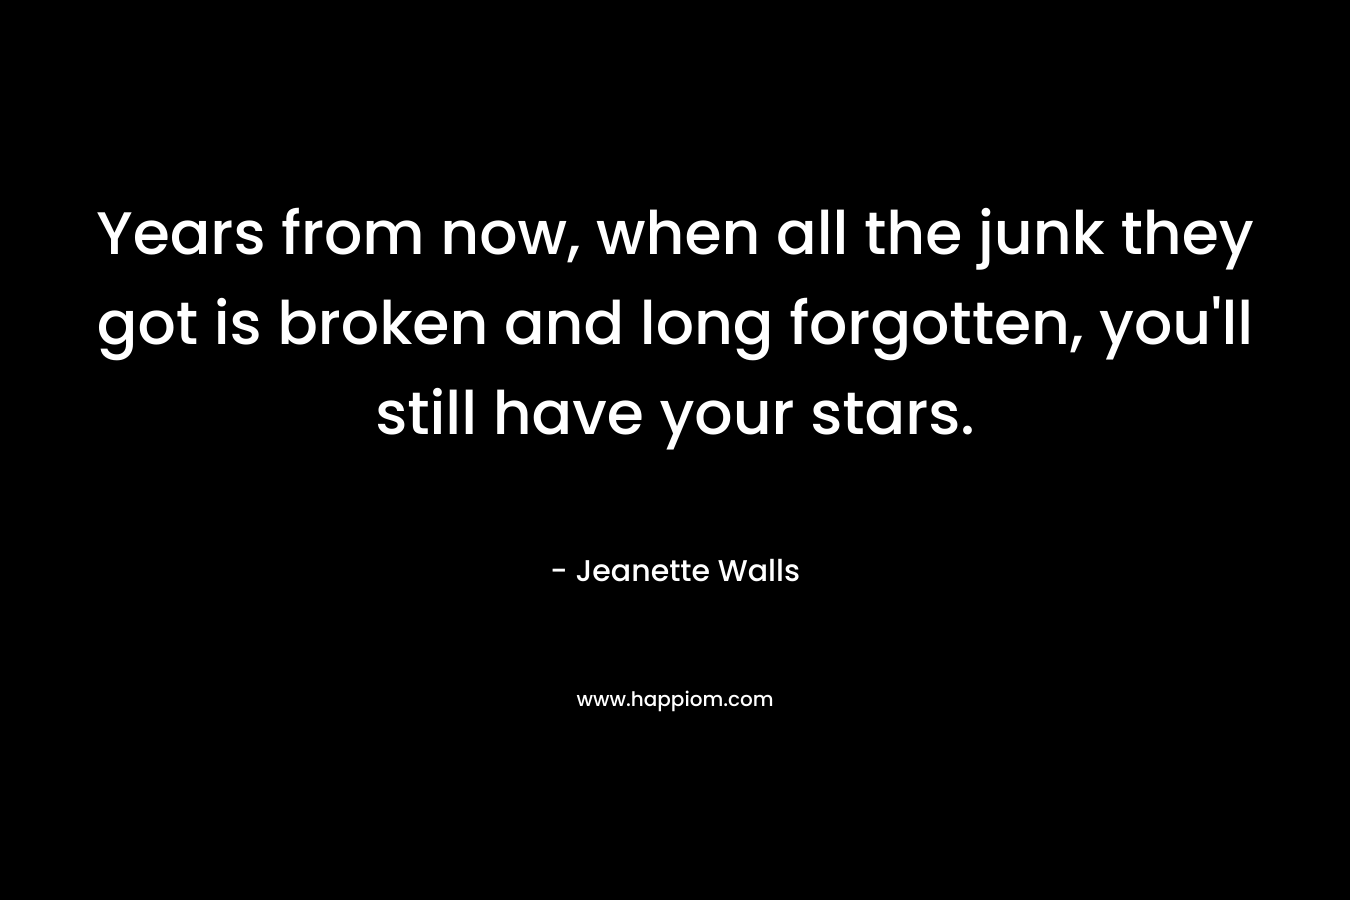 Years from now, when all the junk they got is broken and long forgotten, you'll still have your stars.